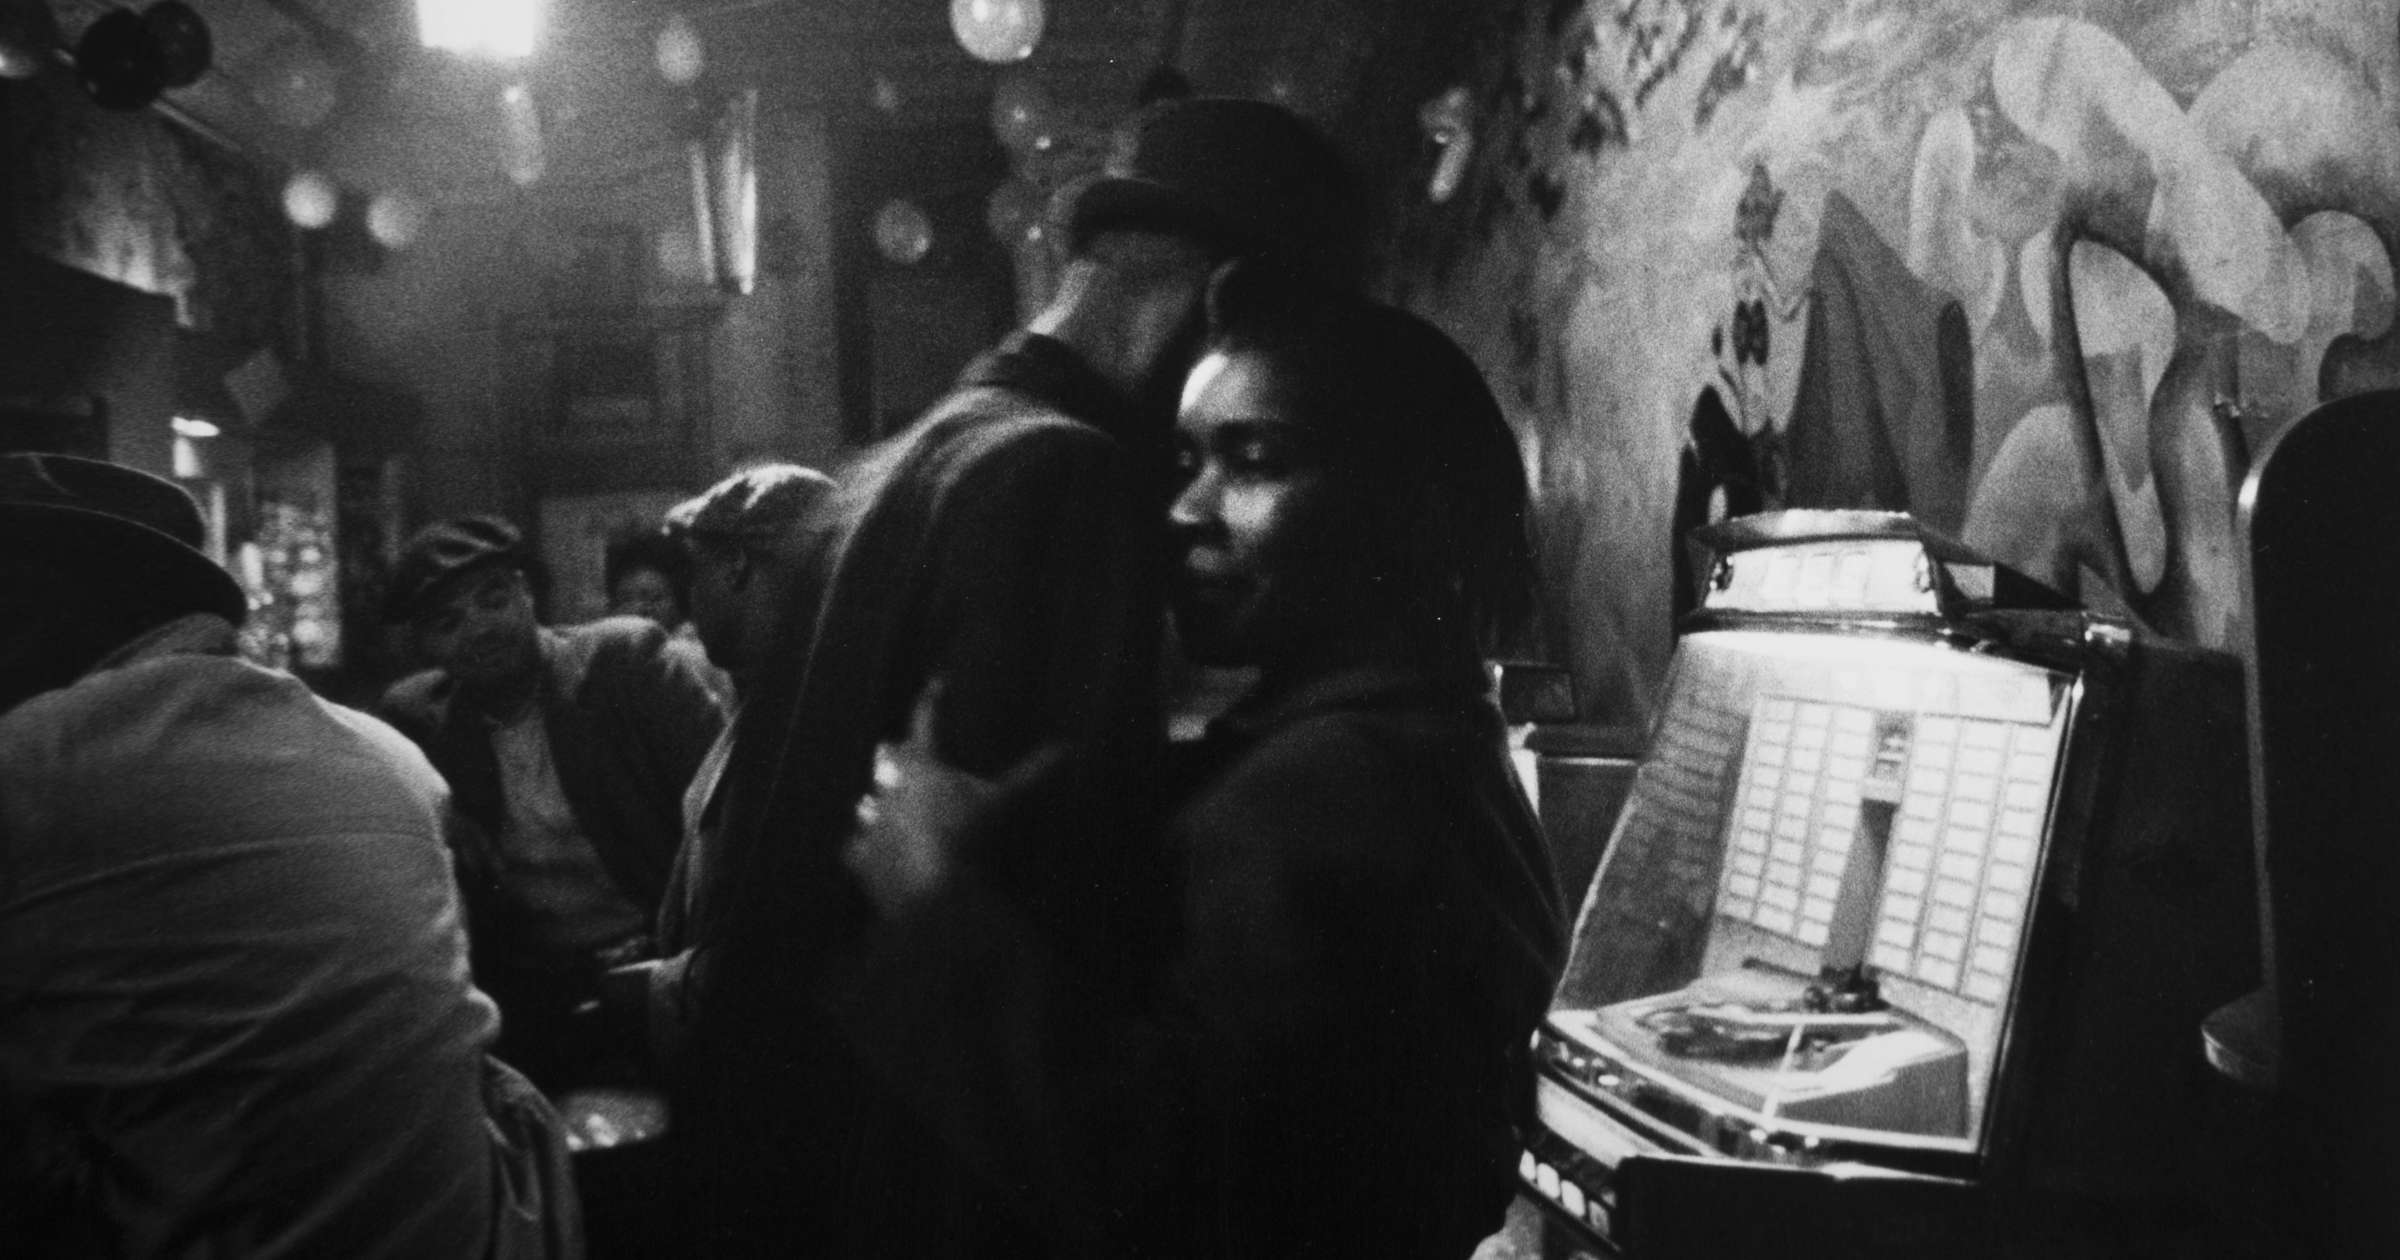 Bruce Davidson, Untitled, Time of Change (Dancing by the Jukebox 